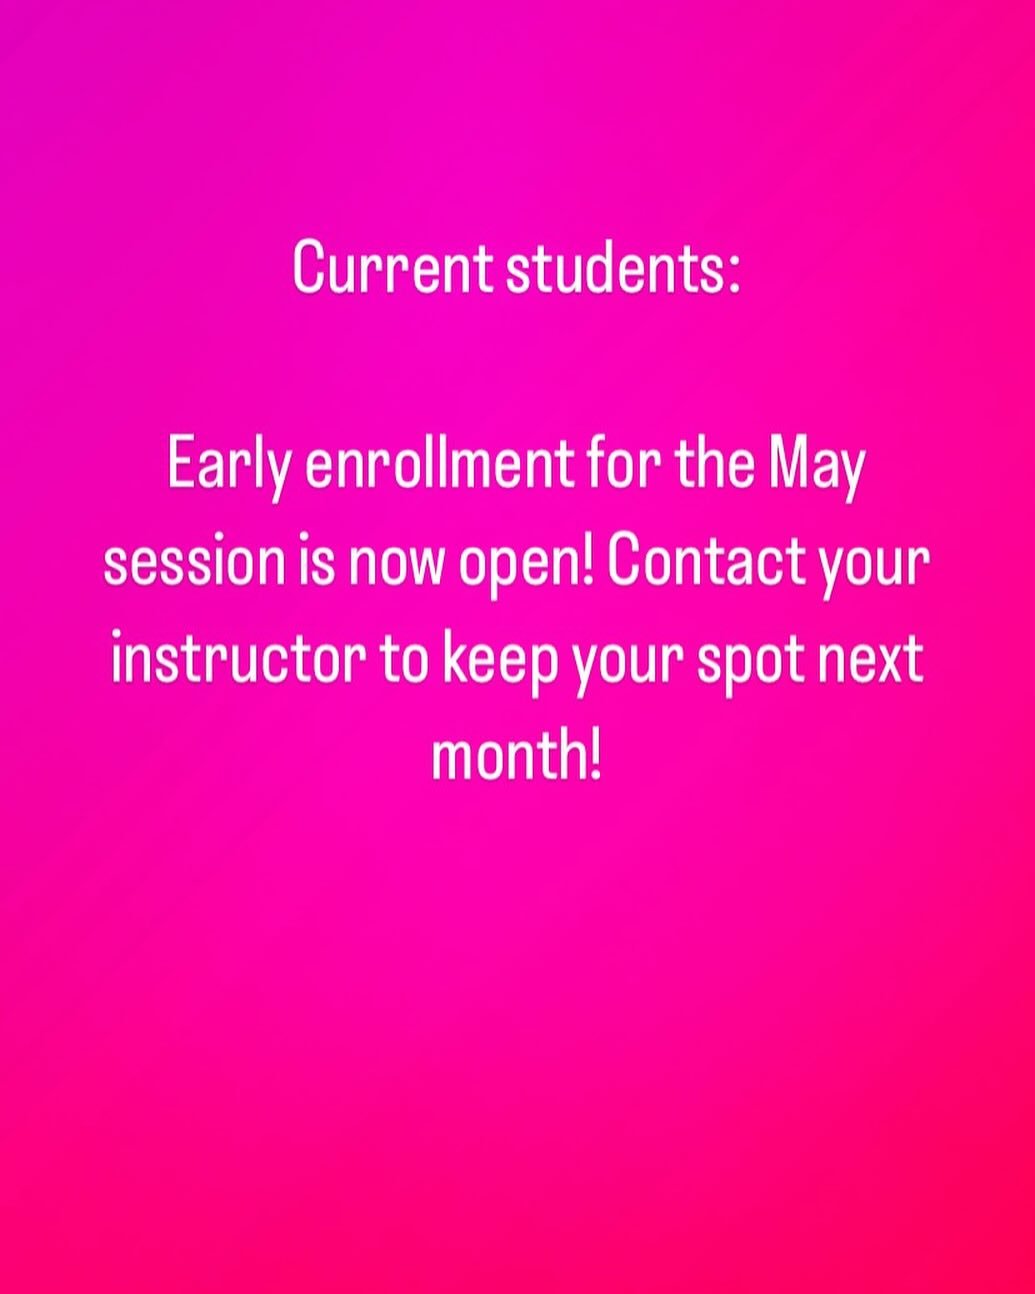 That's right! If you are currently taking Aviary classes, you can enroll in the next session before general enrollment opens! Contact your instructor for more info!!